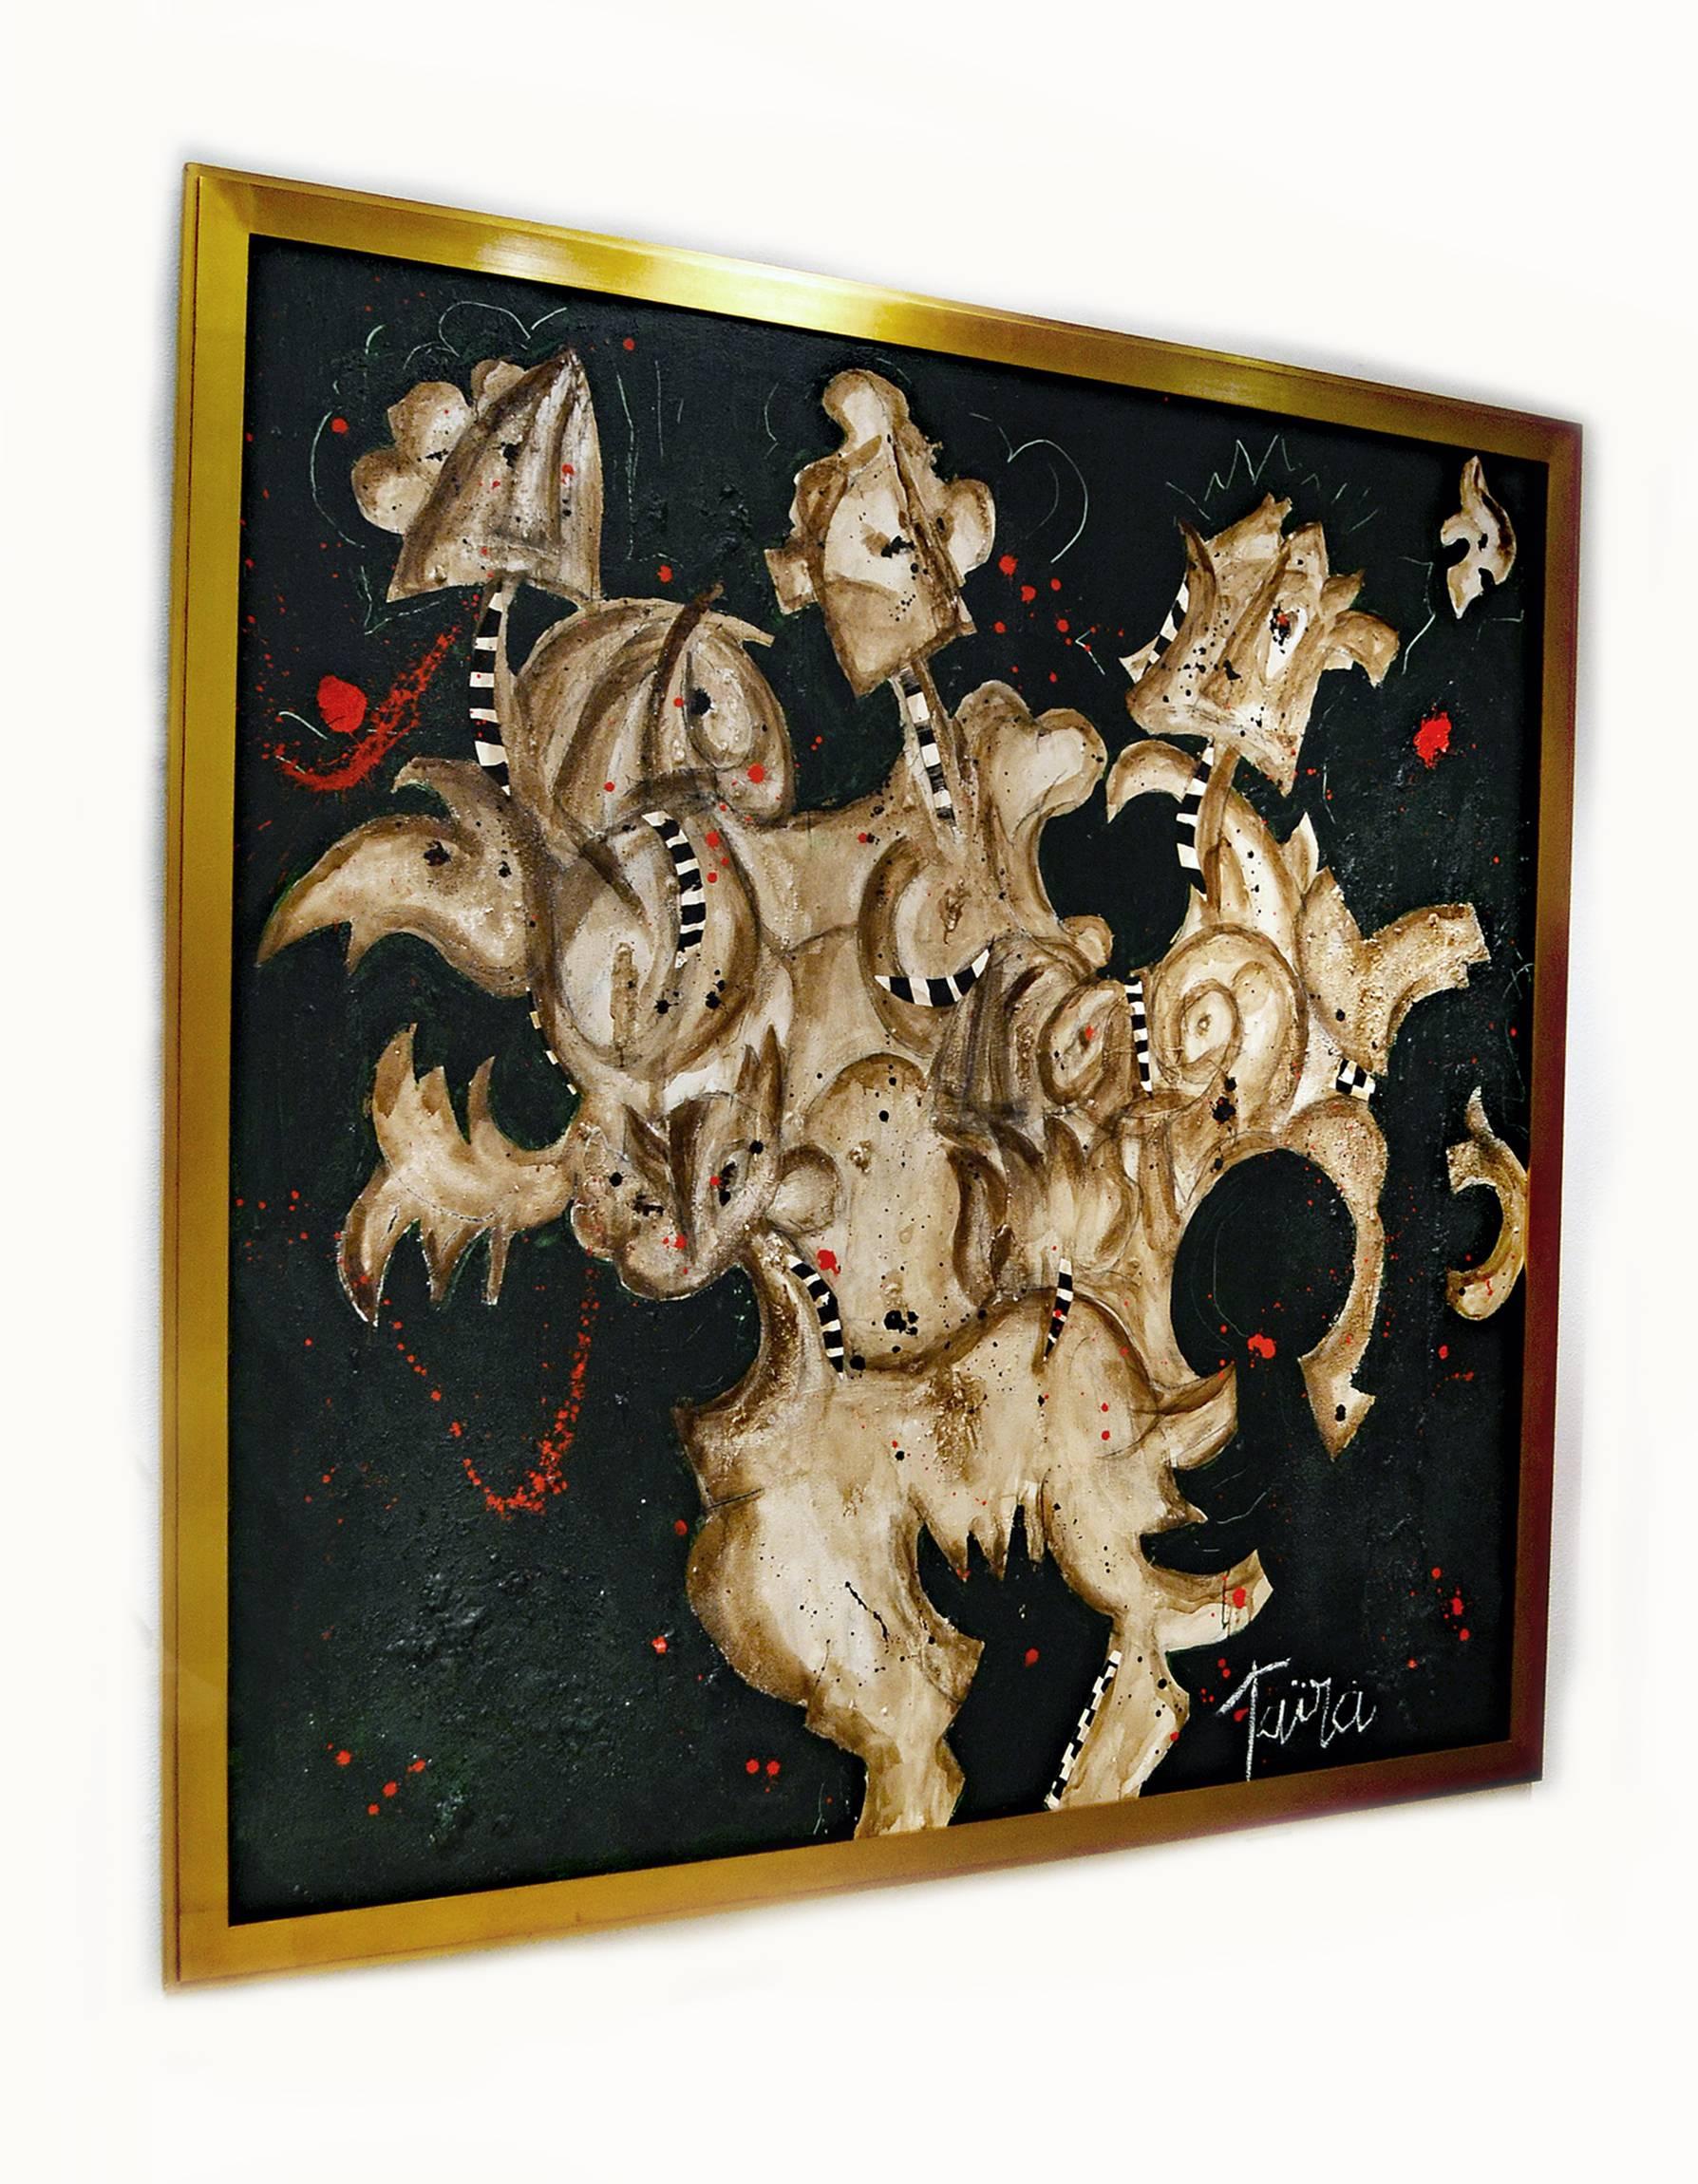 Artist Taira, was born in Russia, studied art in Paris, Montreal and Los Angeles. Titled Harlequins, this mixed media Expressionist abstract work of art is richly textured and layered in ivory and brown with red accents, against a deep green, almost